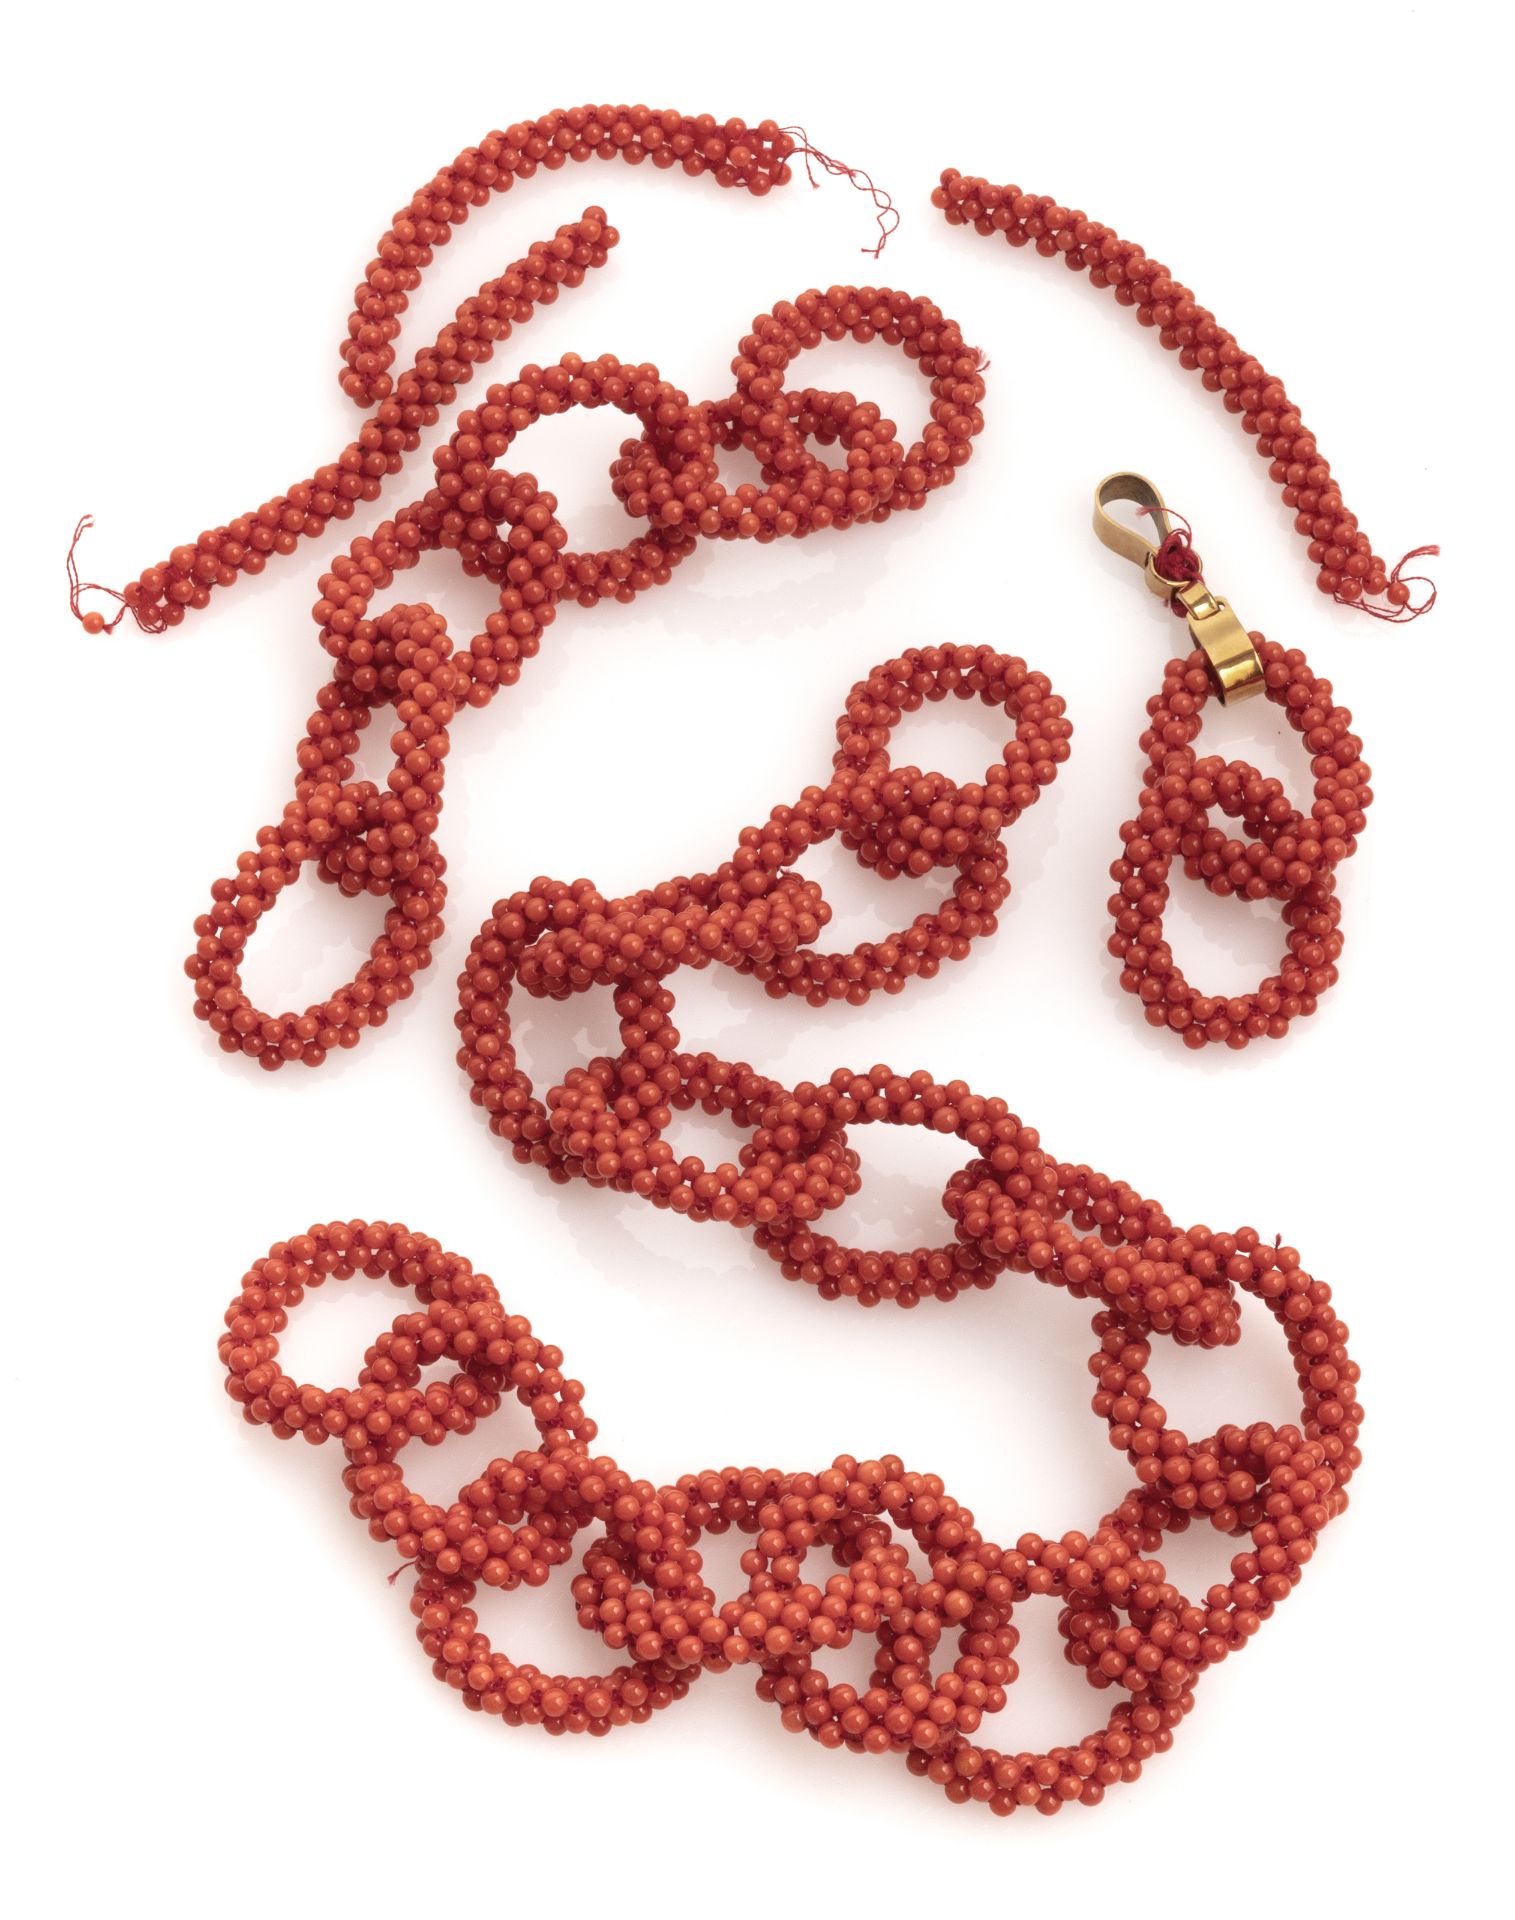 REMAINS OF RED CORAL NECKLACE